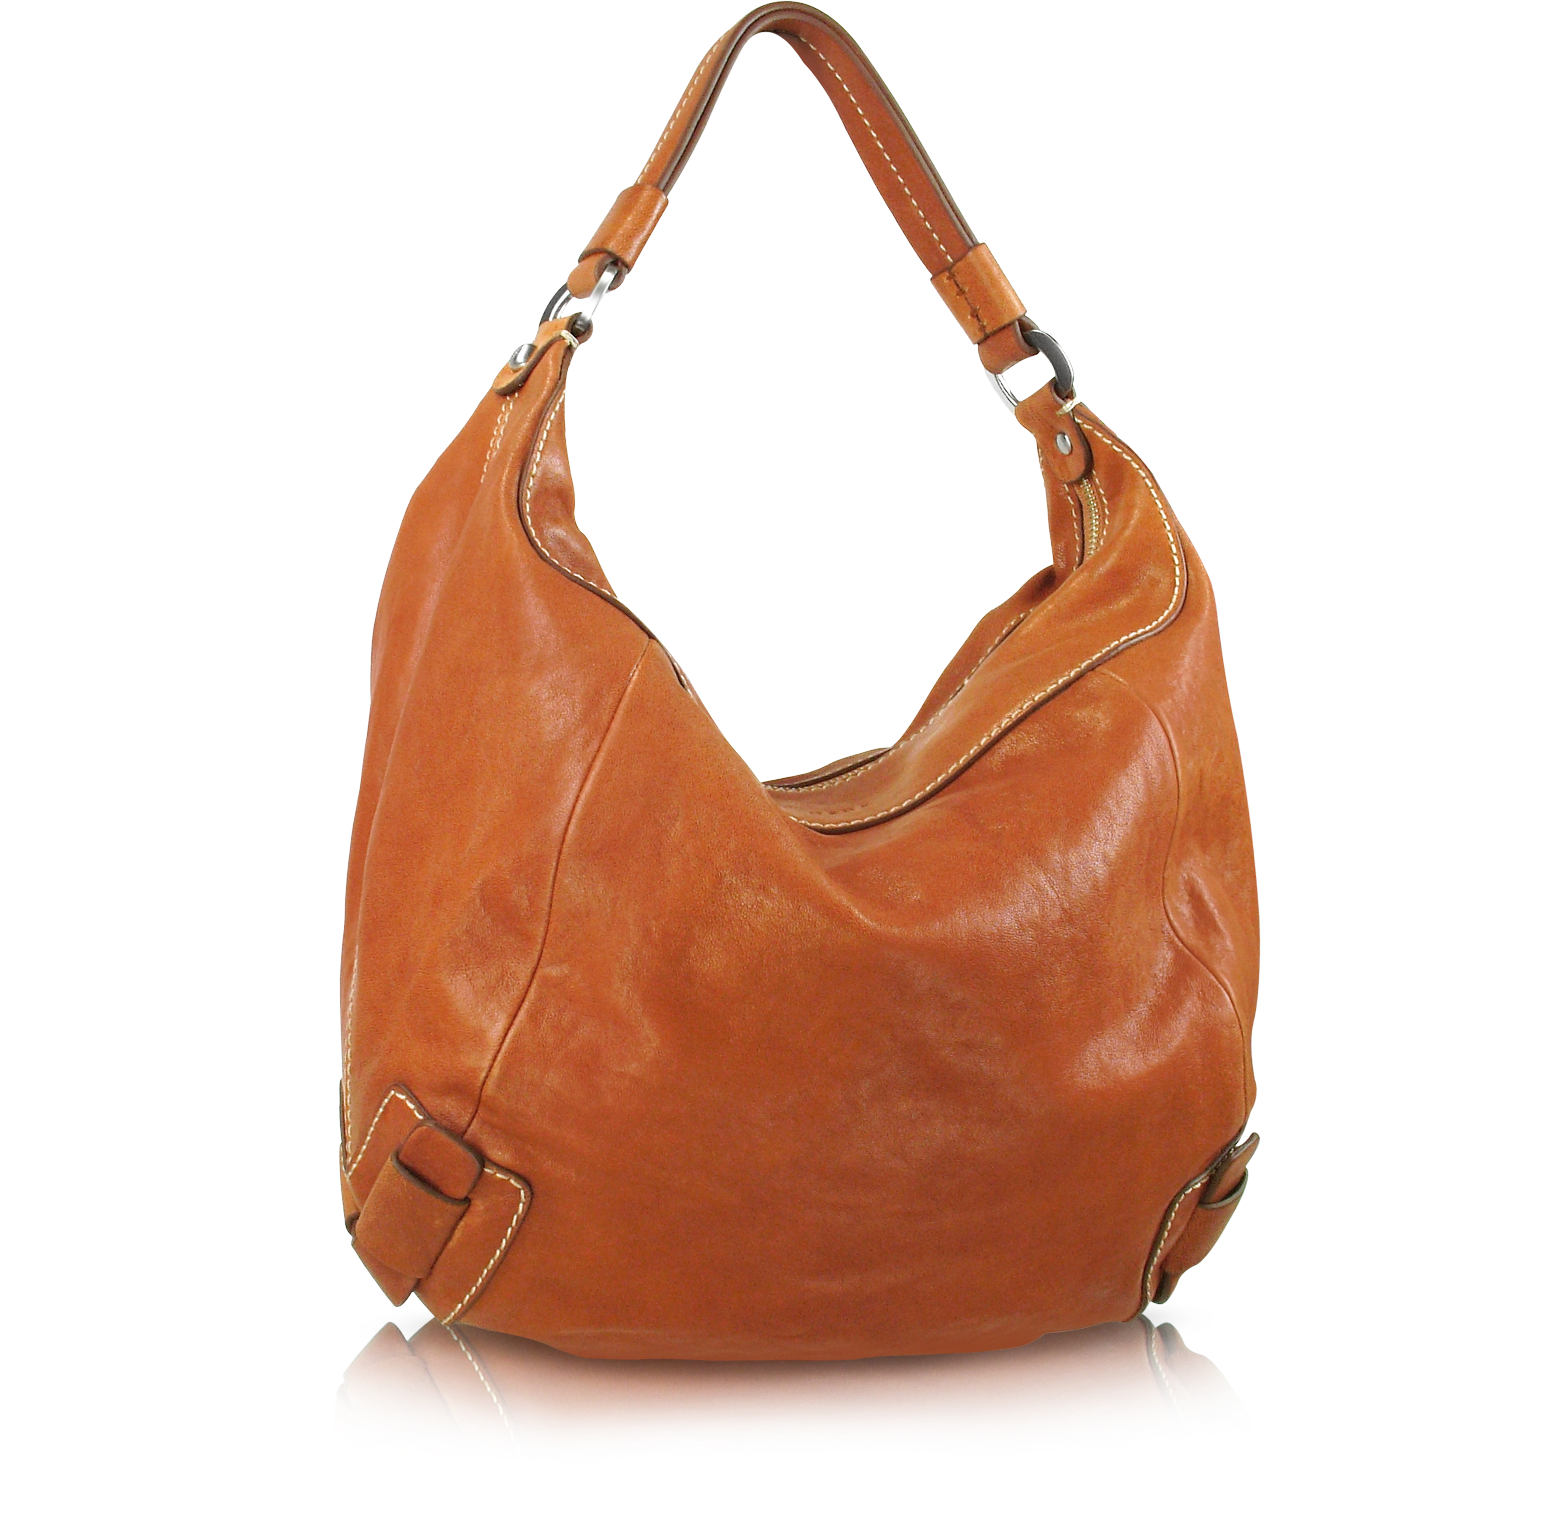 Luana Daniela - Natural Brown Washed Leather Hobo Bag at FORZIERI Canada